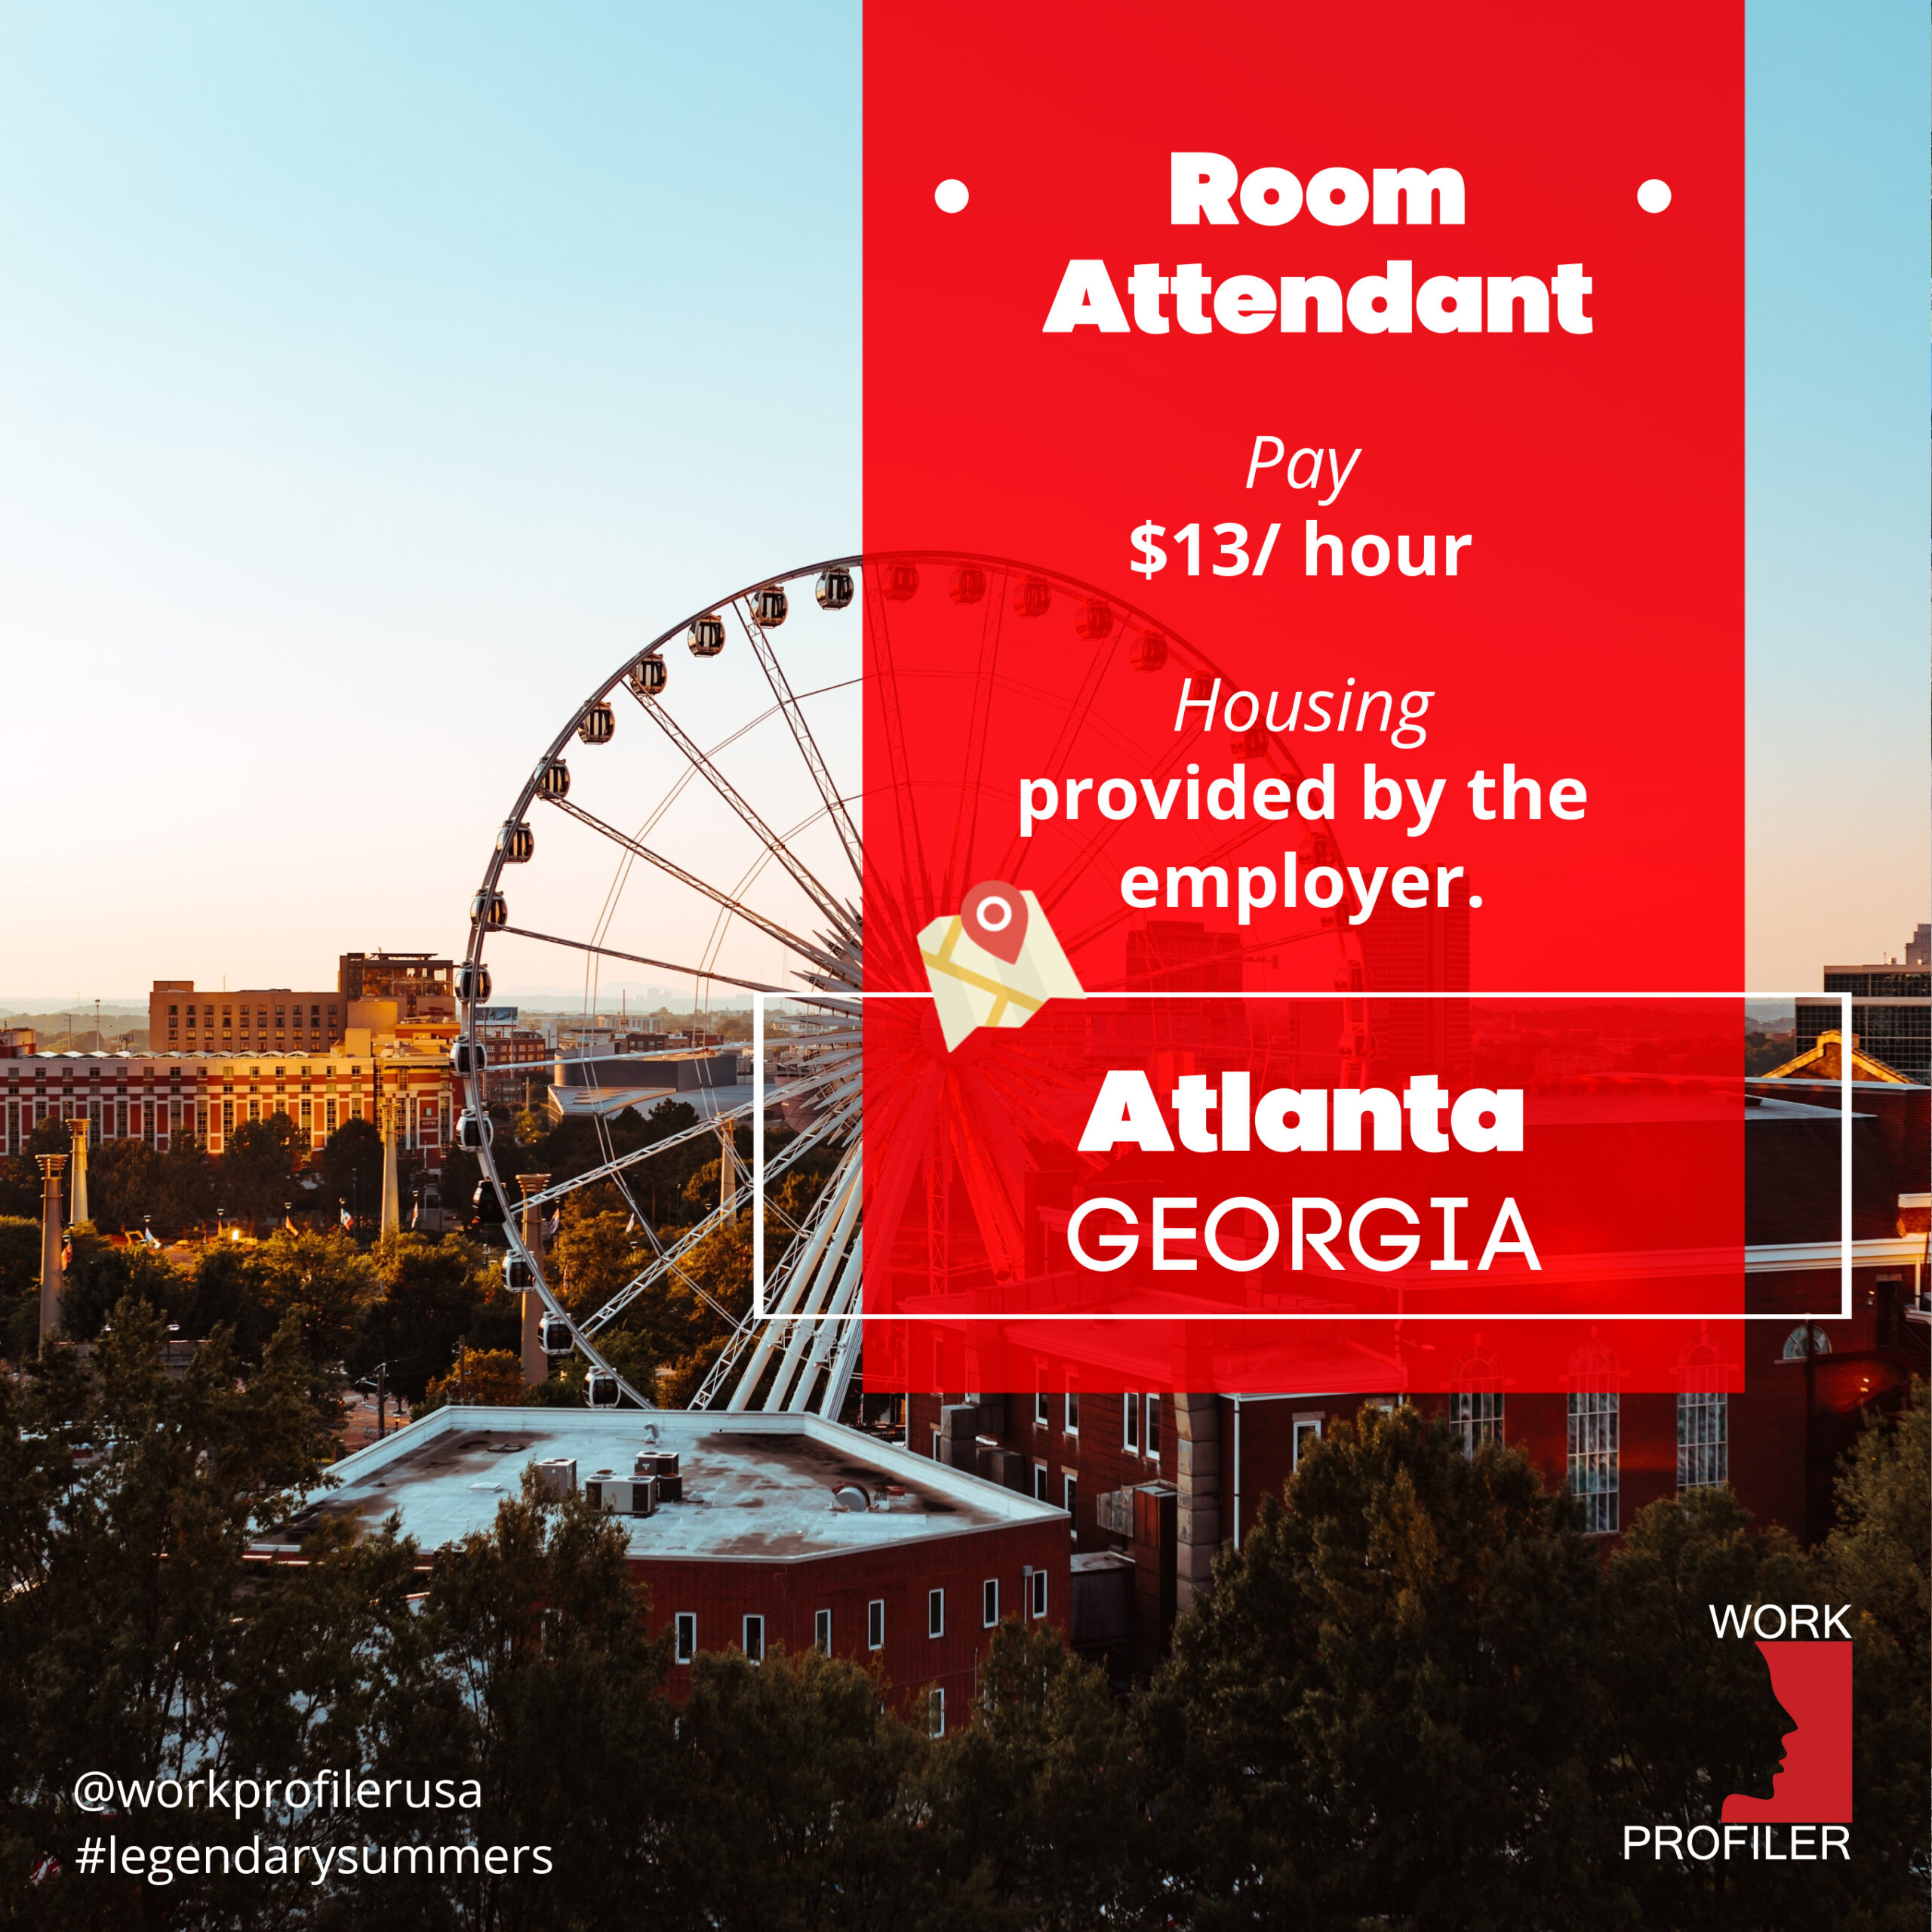 A red job advertisement poster with black text offering a room attendant position in Atlanta, Georgia. The poster mentions a wage of $13 per hour and housing provided by the employer.